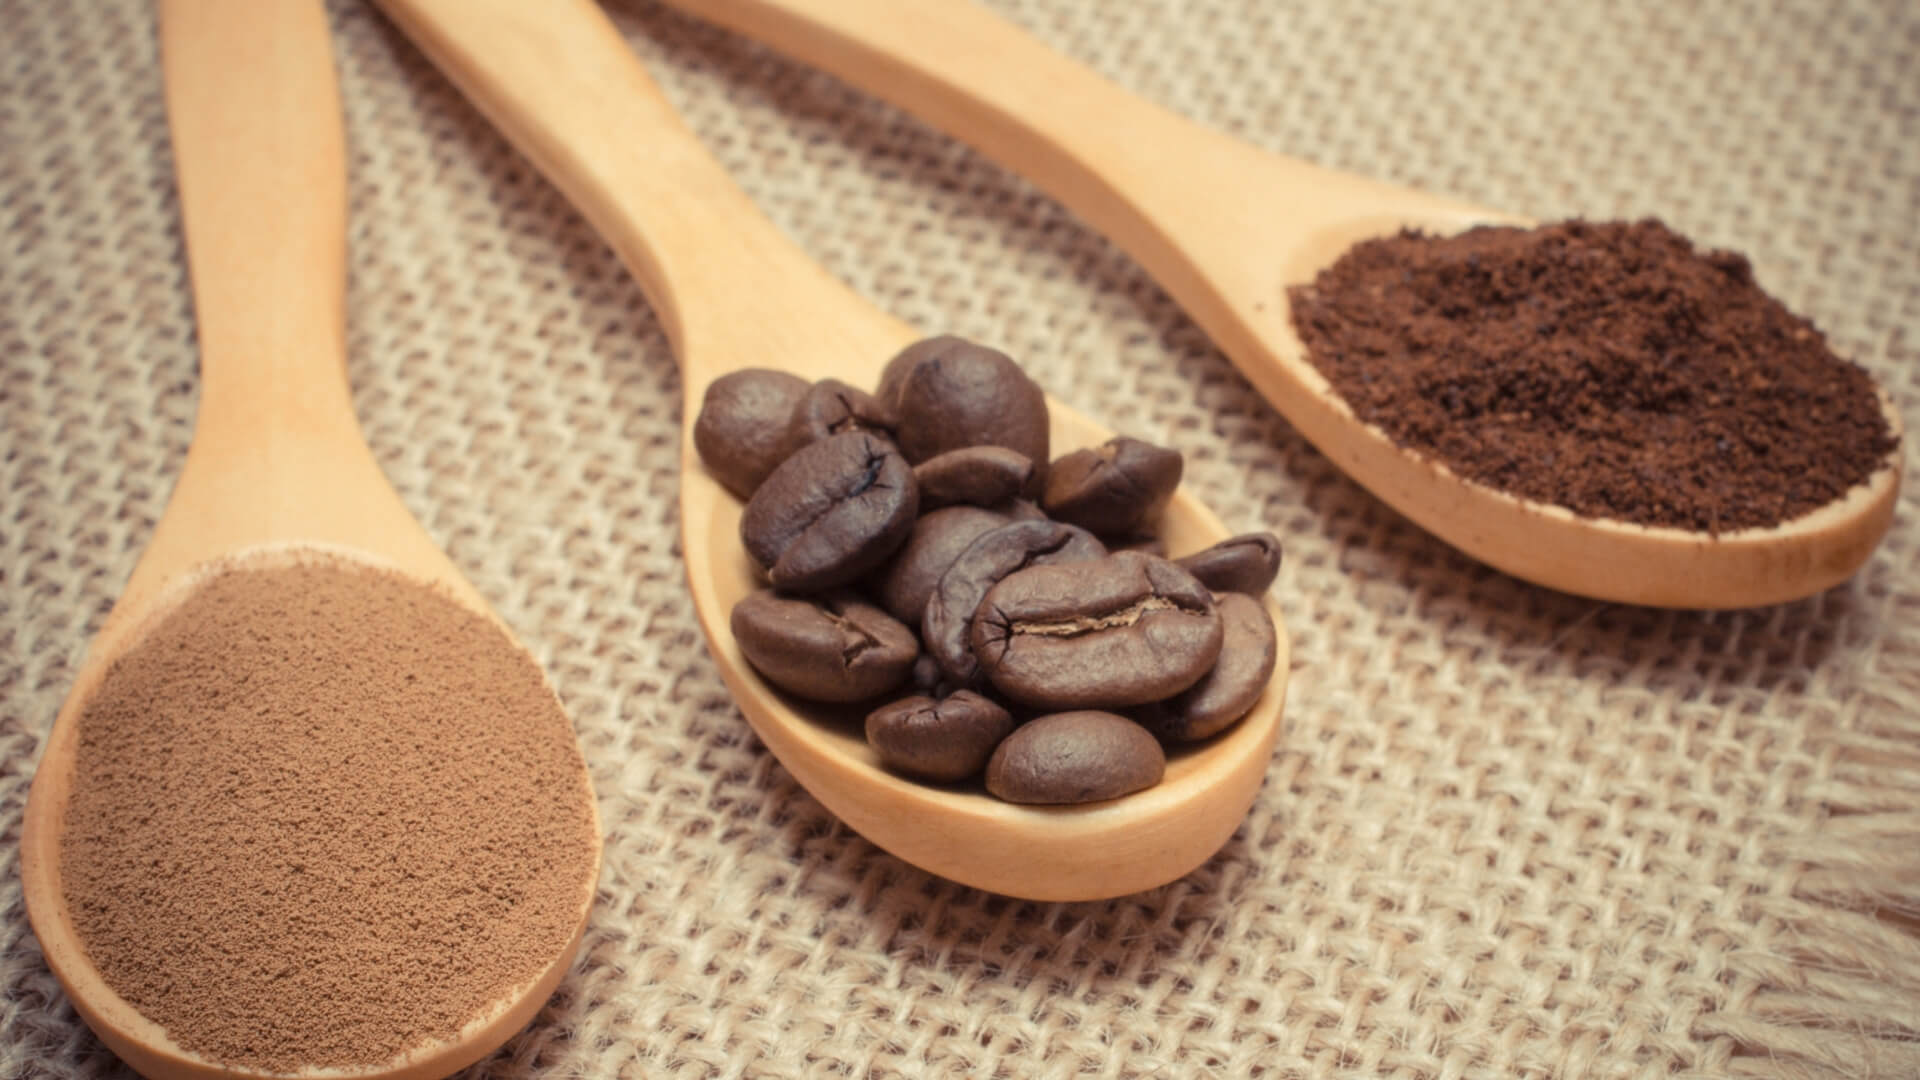 3 wooden spoons on the table presenting different types of coffee: coffee beans vs instant coffee vs ground coffee